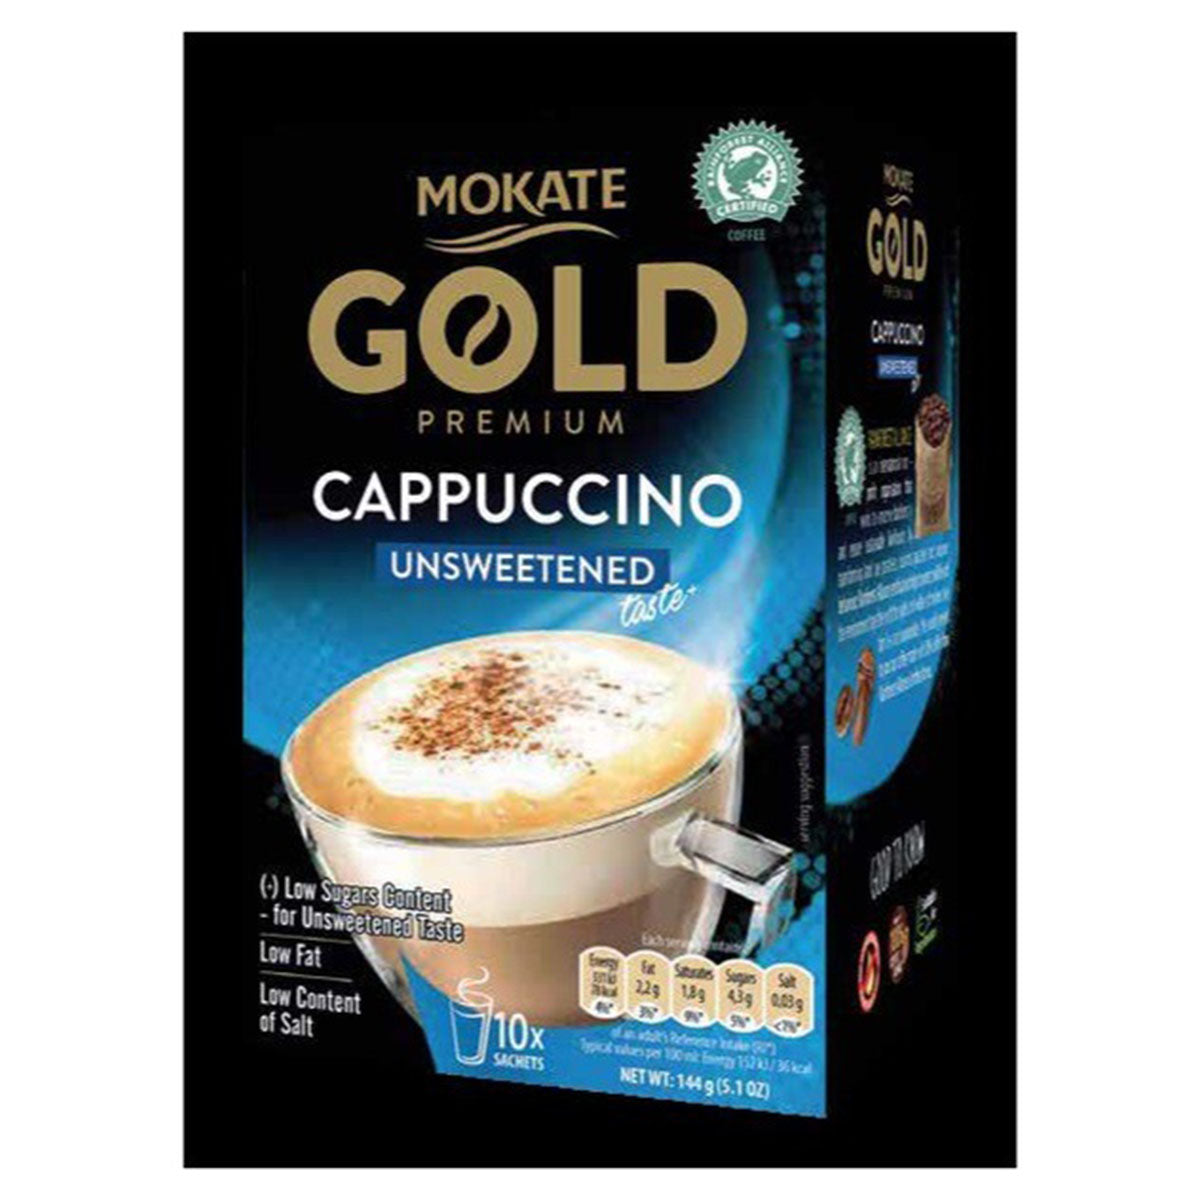 Mokate - Gold Premium Cappuccino Unsweetened 10 Sachets - 140g - Continental Food Store